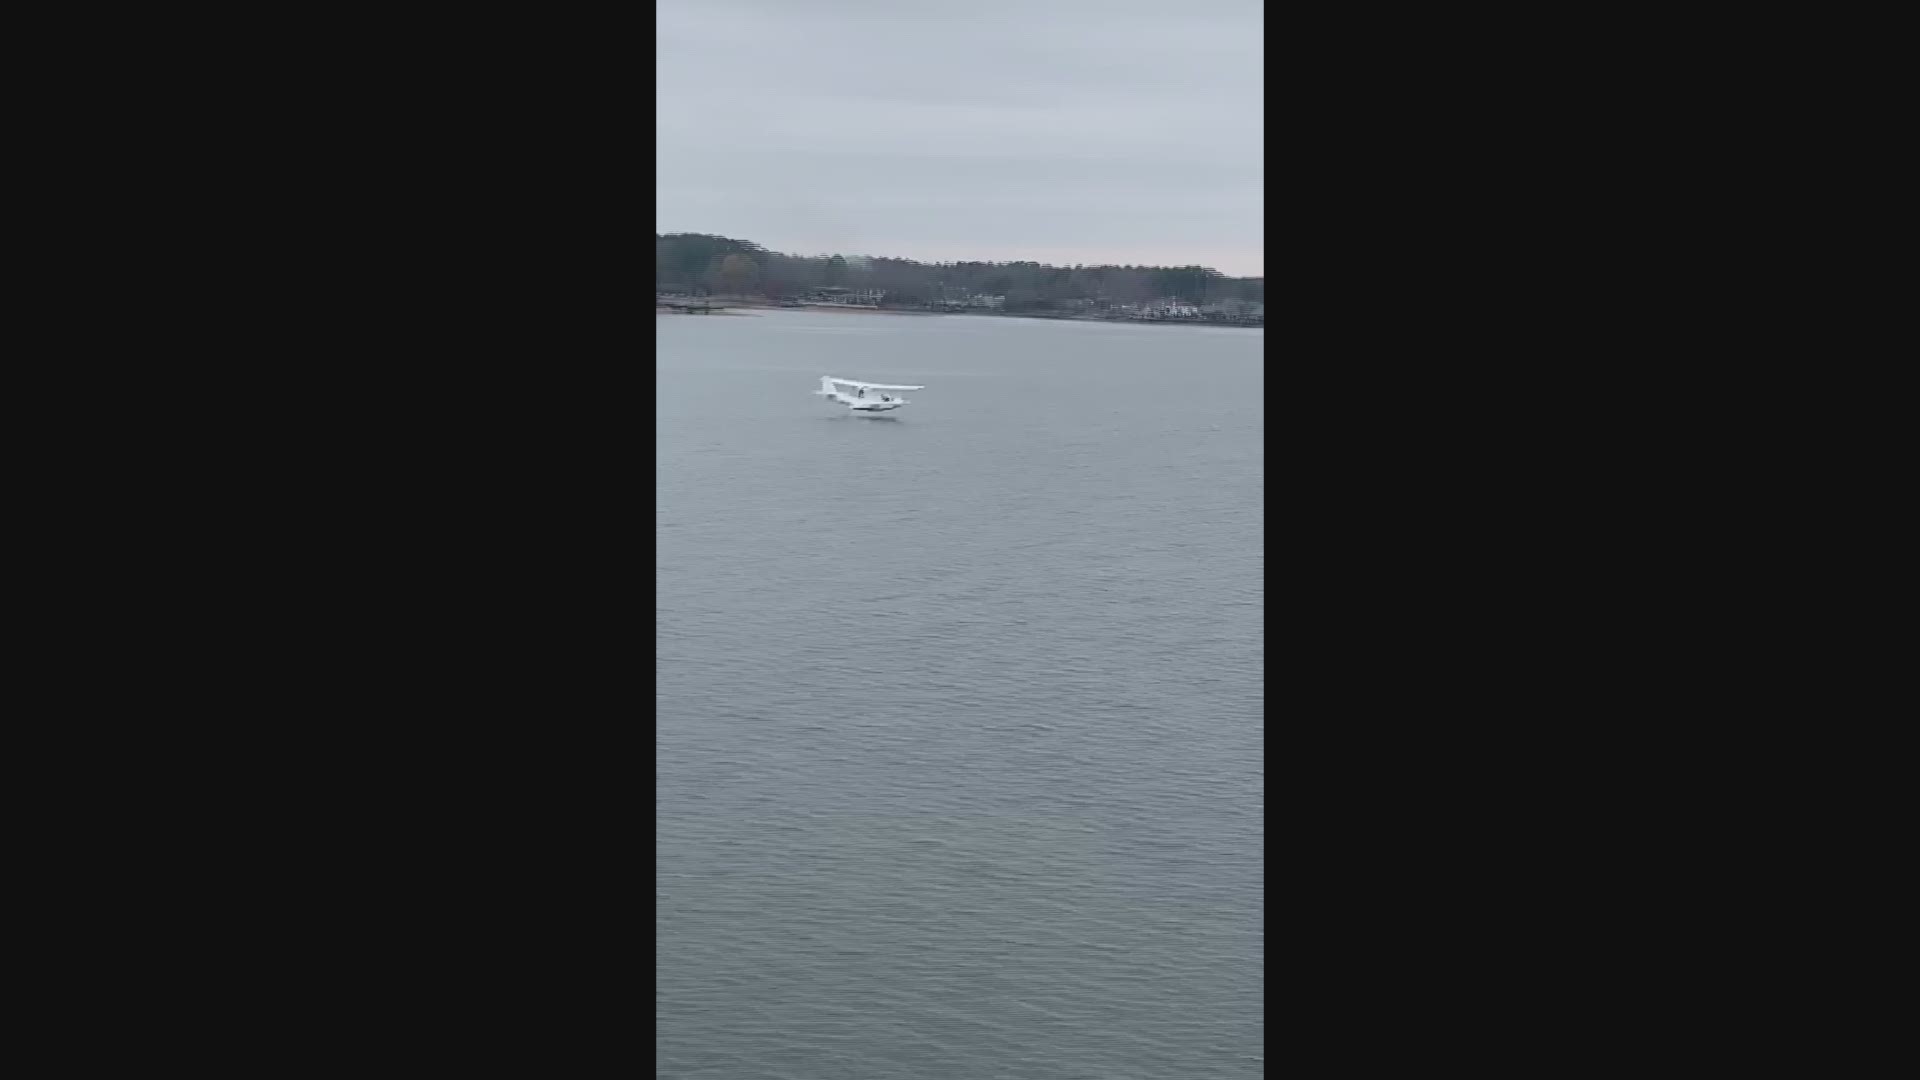 On Friday, visitors at Lake Hamilton caught of glimpse of what appears to be a seaplane landing on the water.